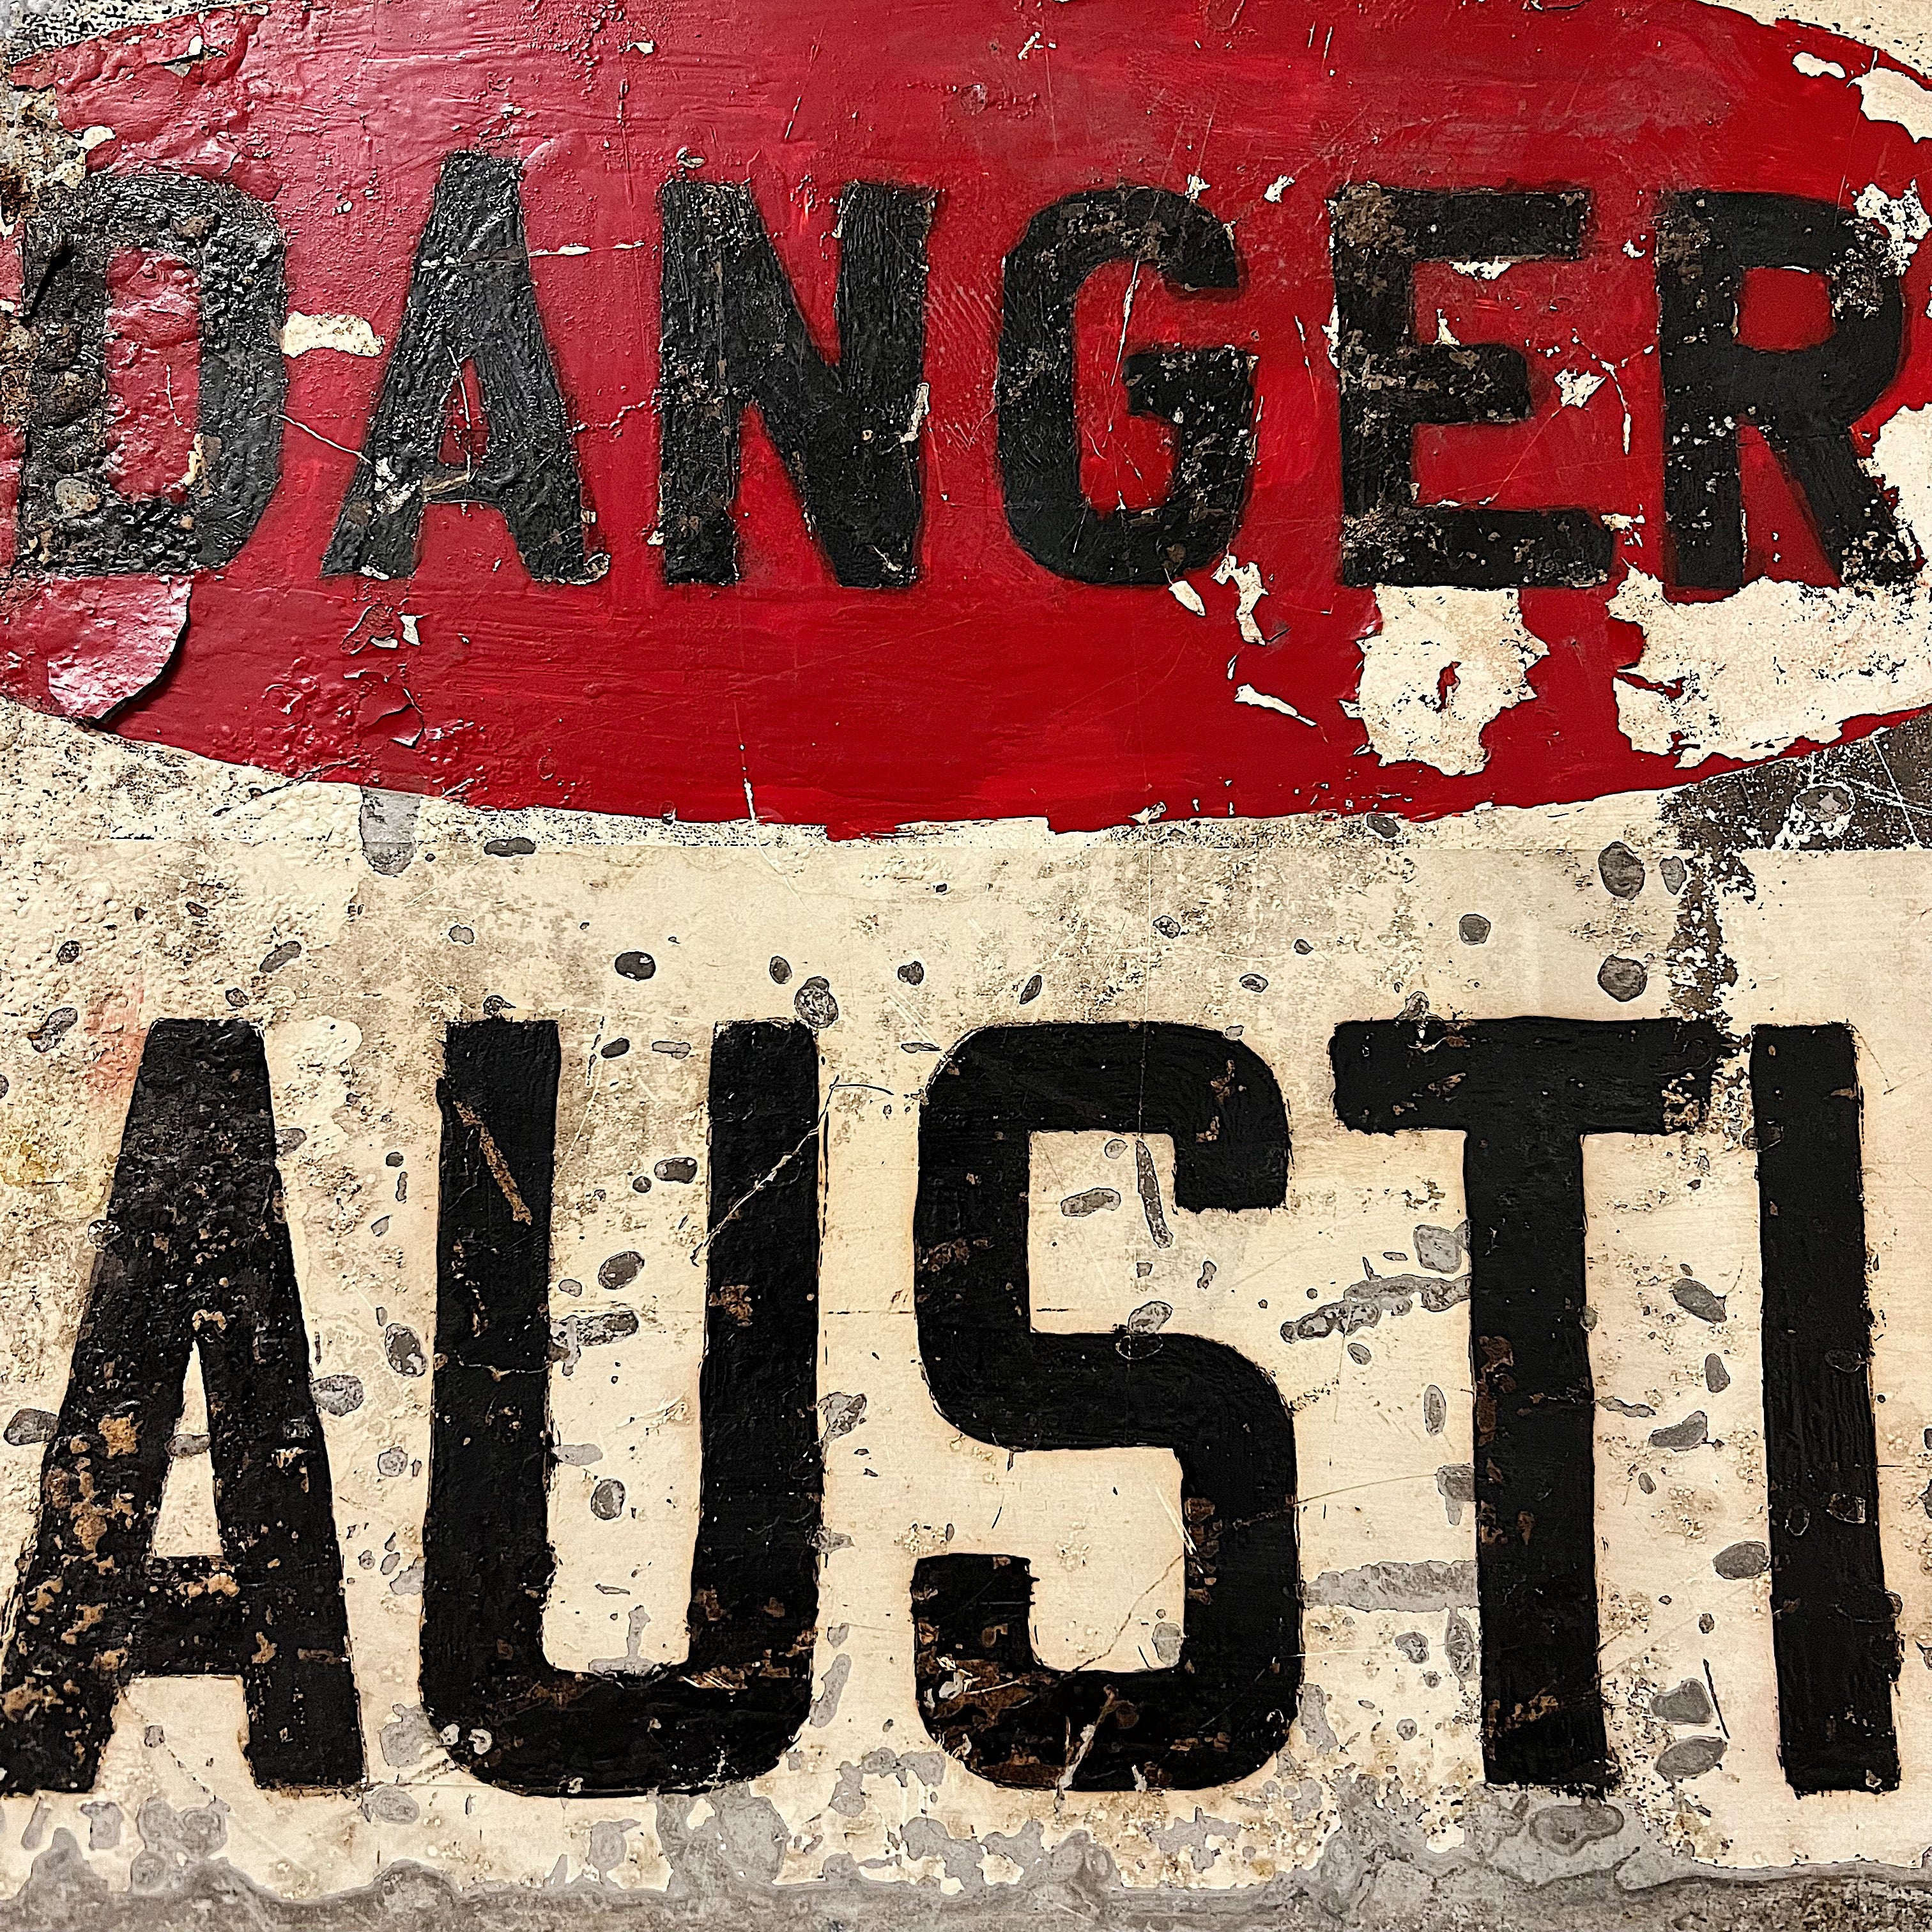 Rare Vintage Danger Caustic Sign from 1950s - Factory Hand Painted Metal Industrial Decor - Cool Chemical Wall Signs - Rare Unusual Wall Decor